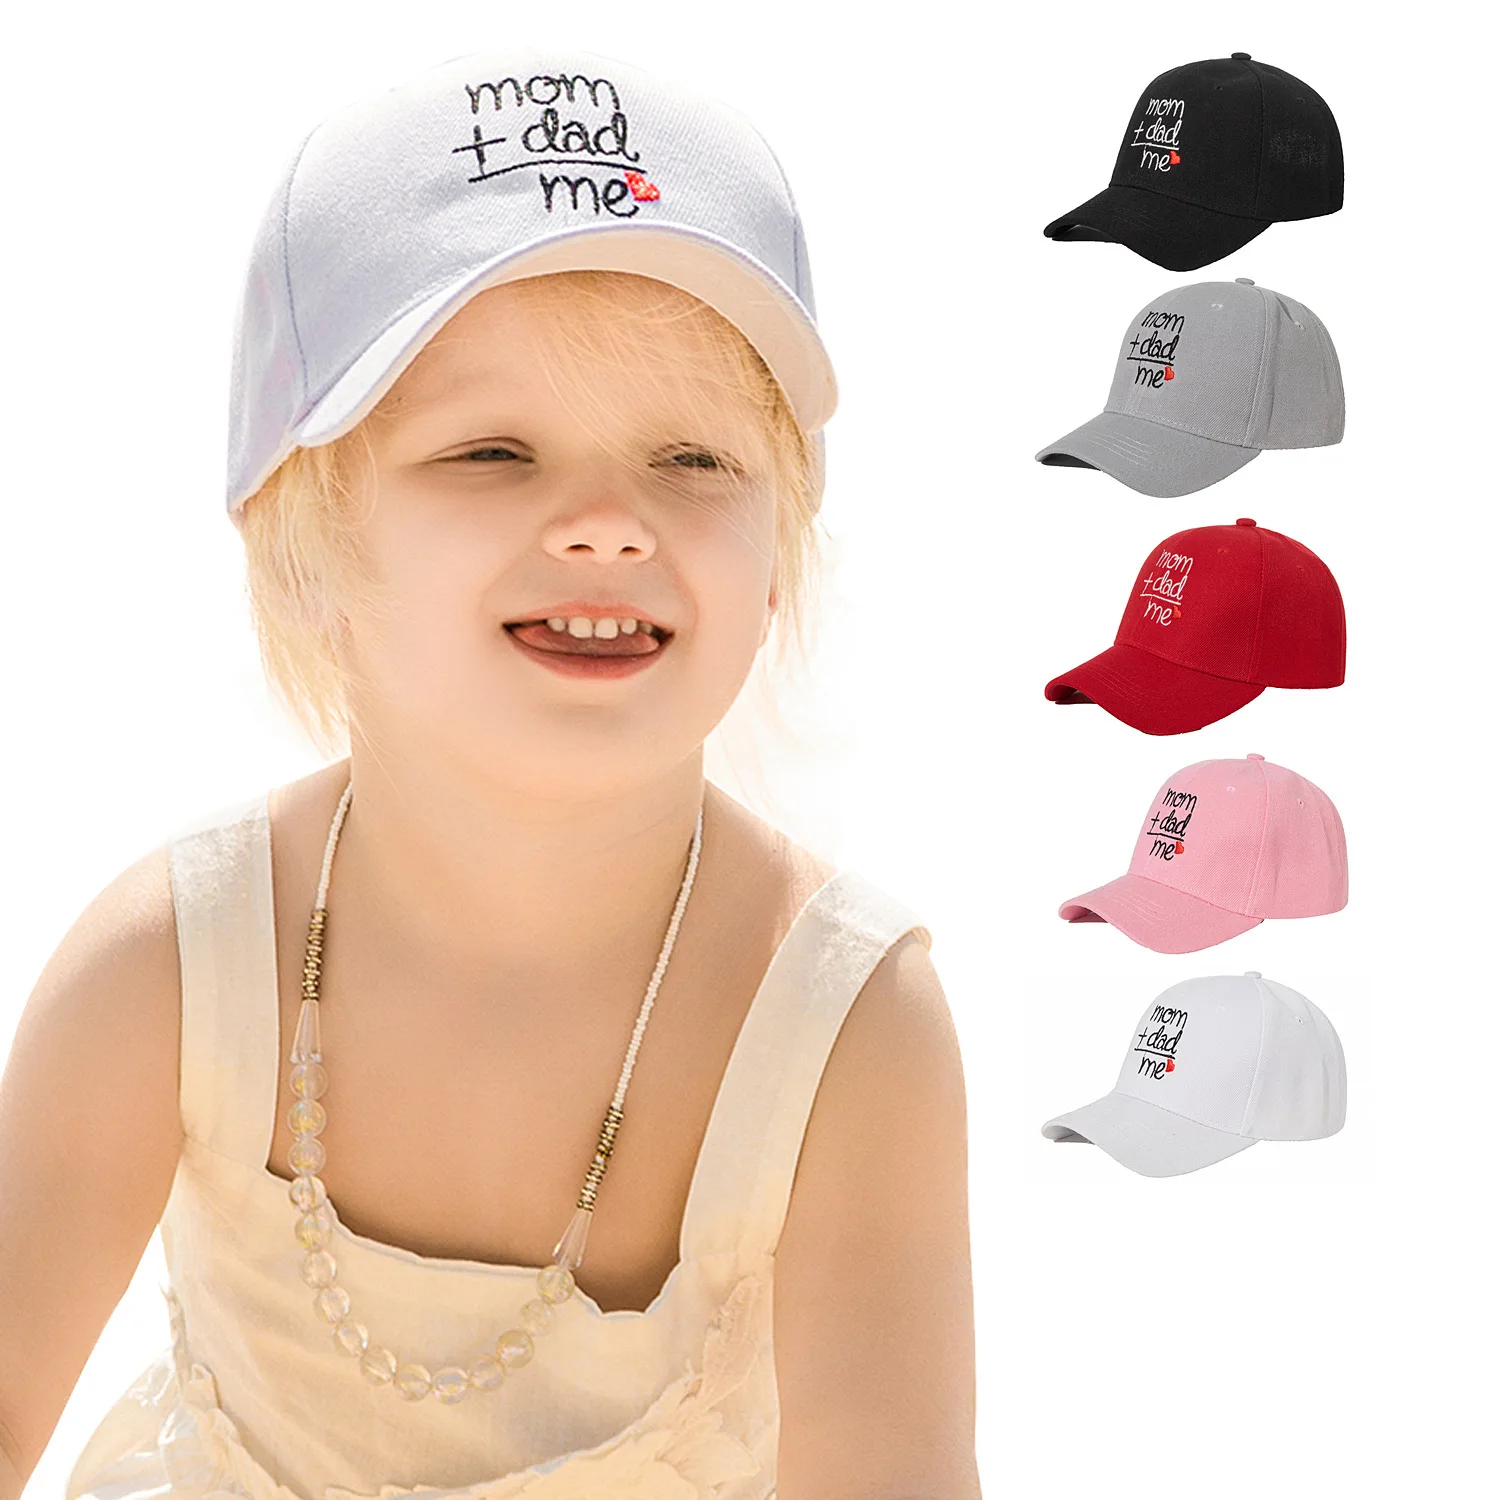 

2021 Child Hats Kids Snapback Baseball Cap With Letter Embroidery Letters Hats Spring Summer Hip Hop Boy Hats Sun Caps Bones